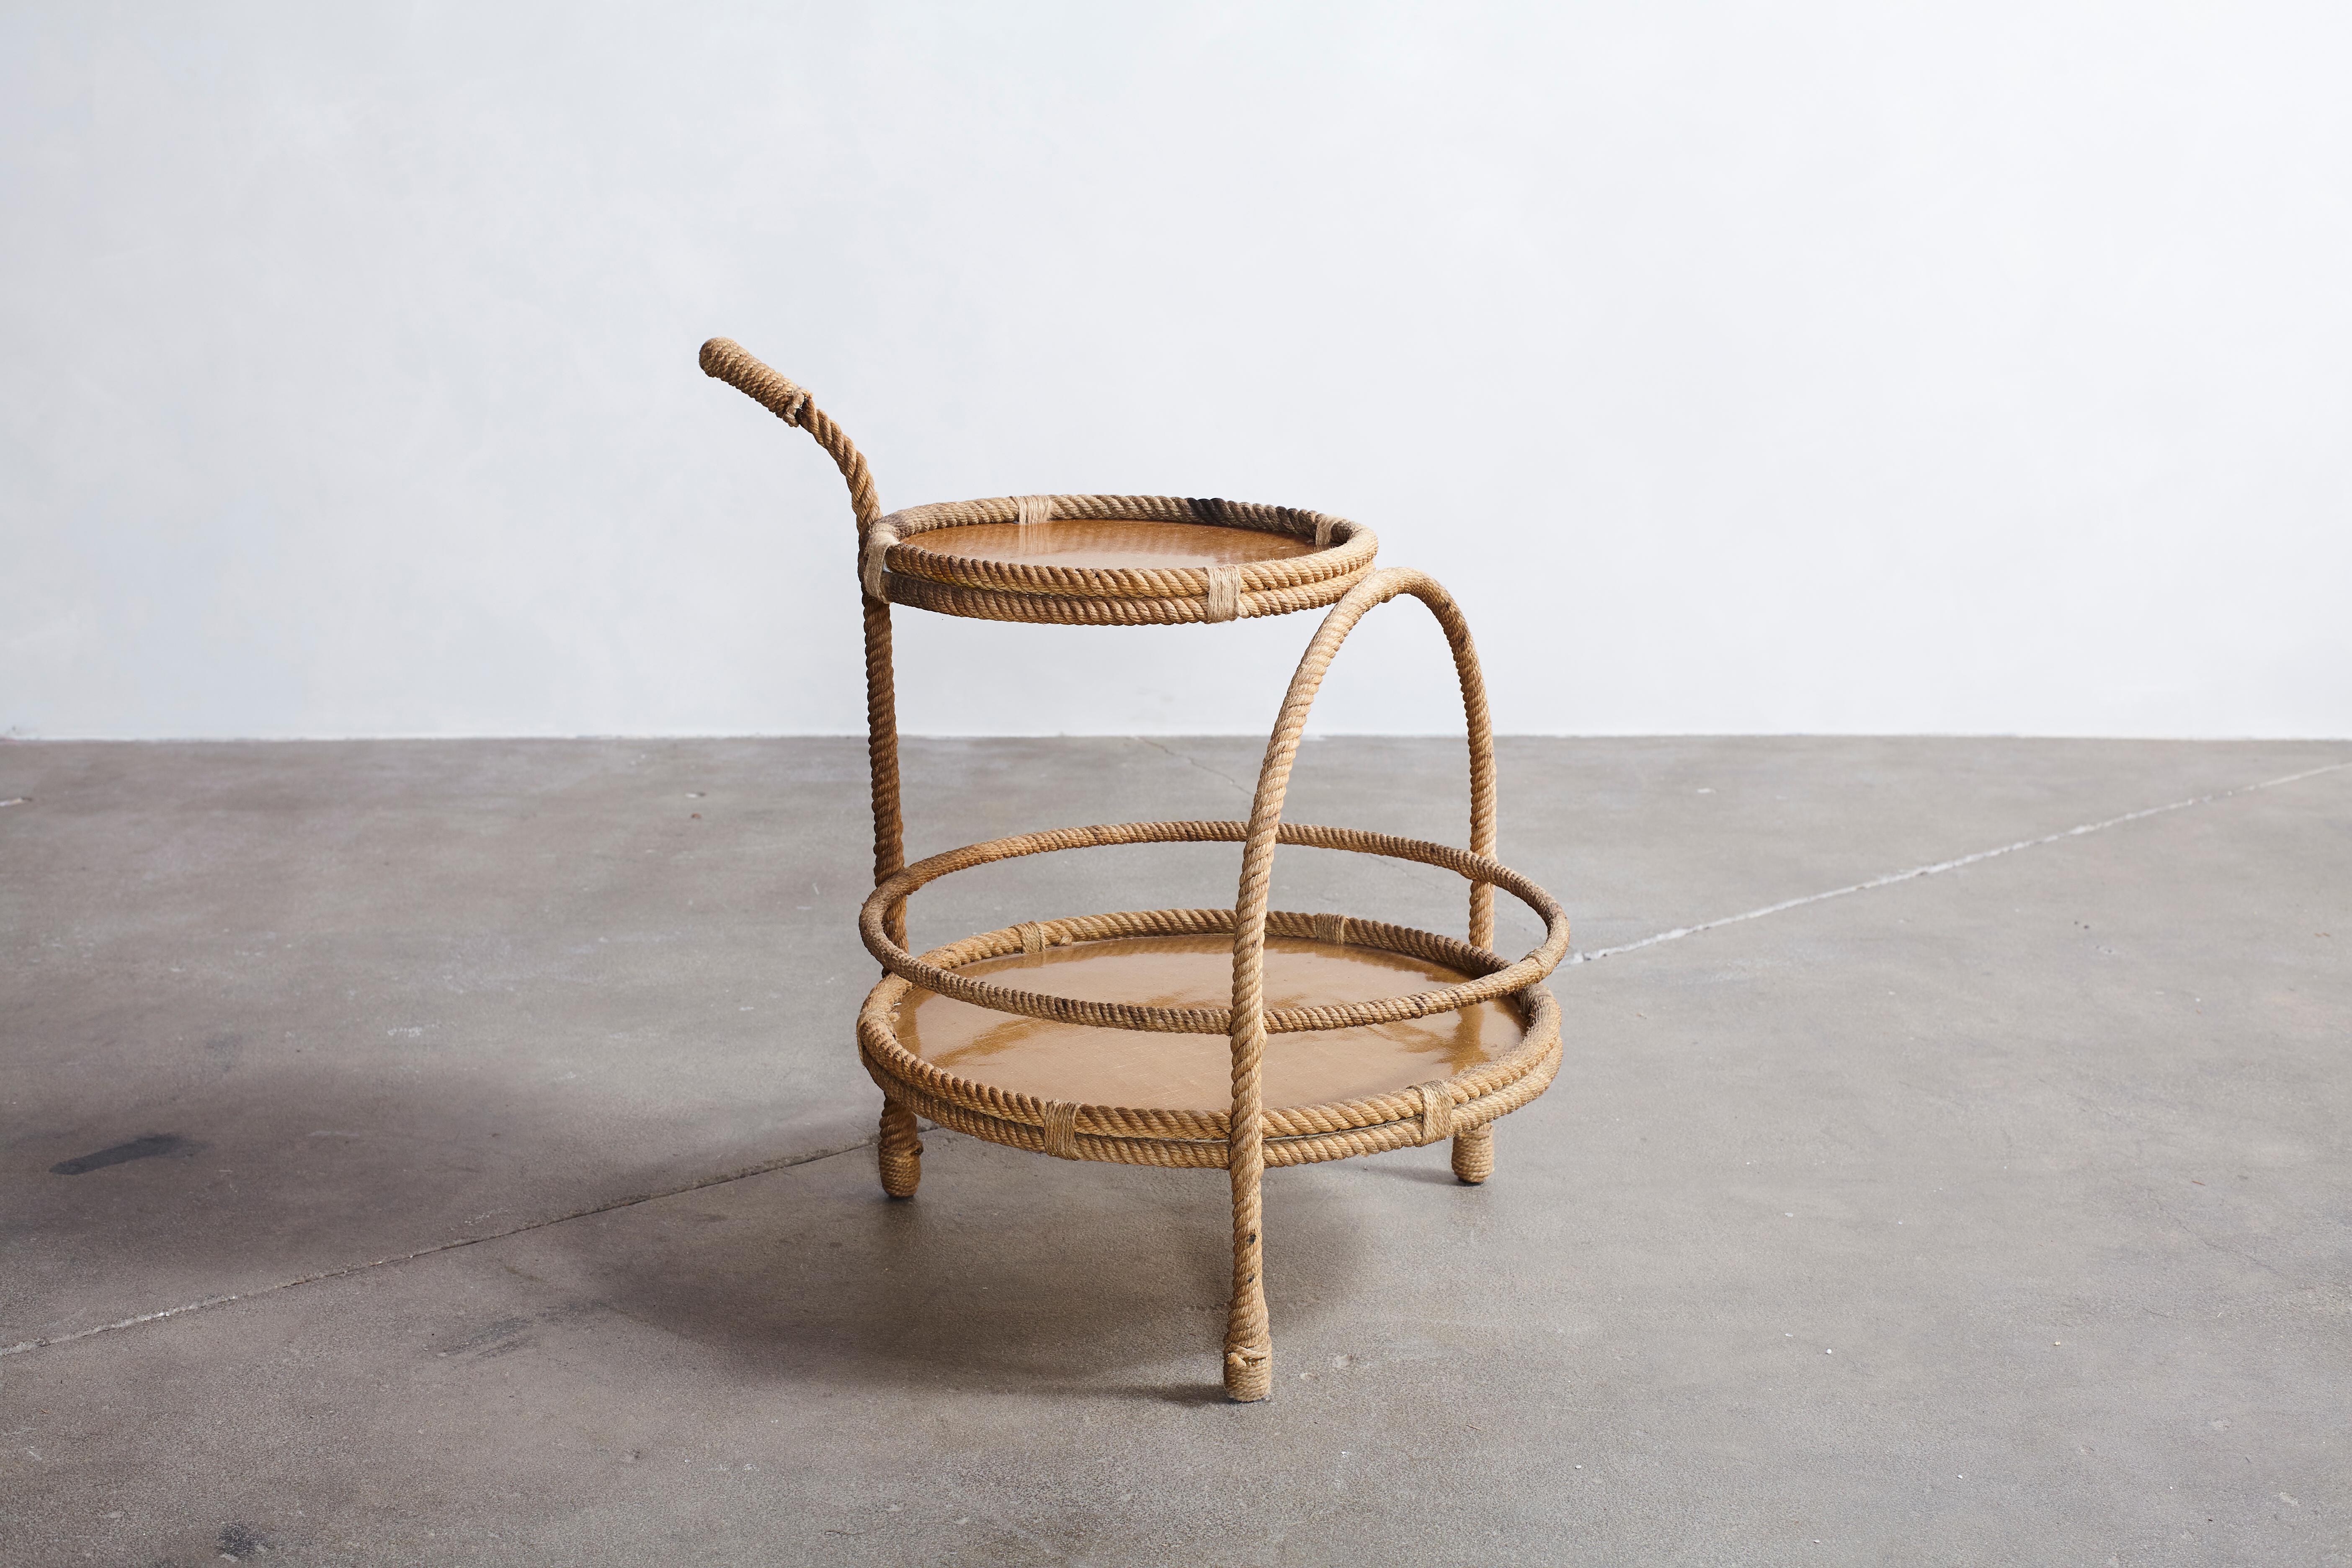 Audoux-Minet rope and fiber glass side table.
Exceptional table by Adrien Audoux & Frida Minet, manufactured by Vibo in France in the 1950s. Frame is made of rope with two fiberglass trays.